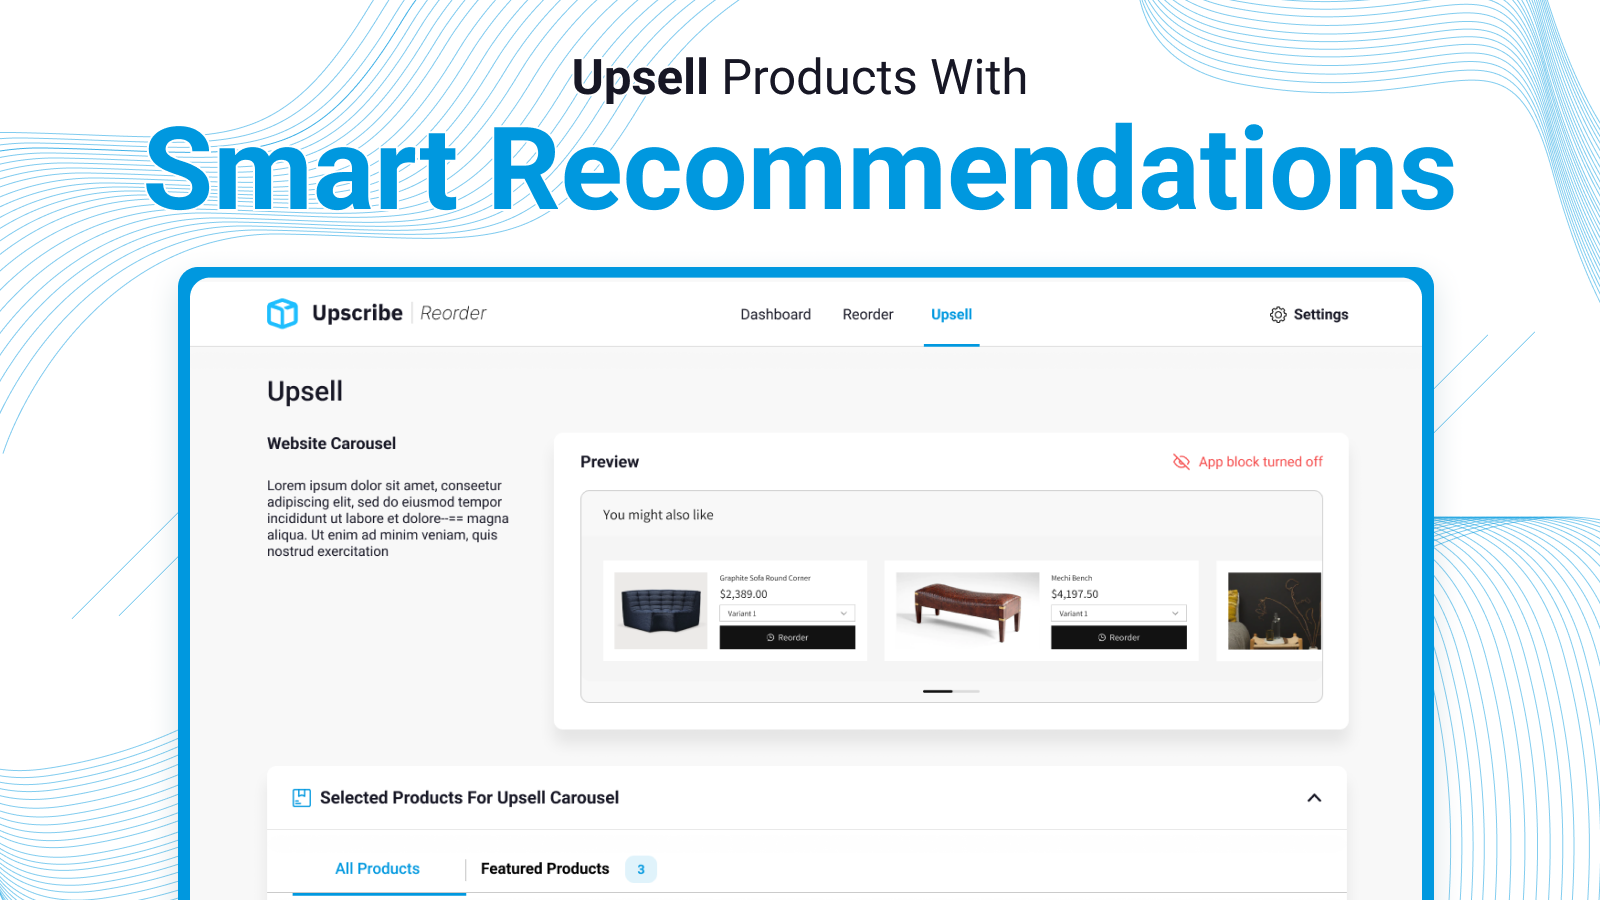 Upsell reorder customers in cart with products they might like